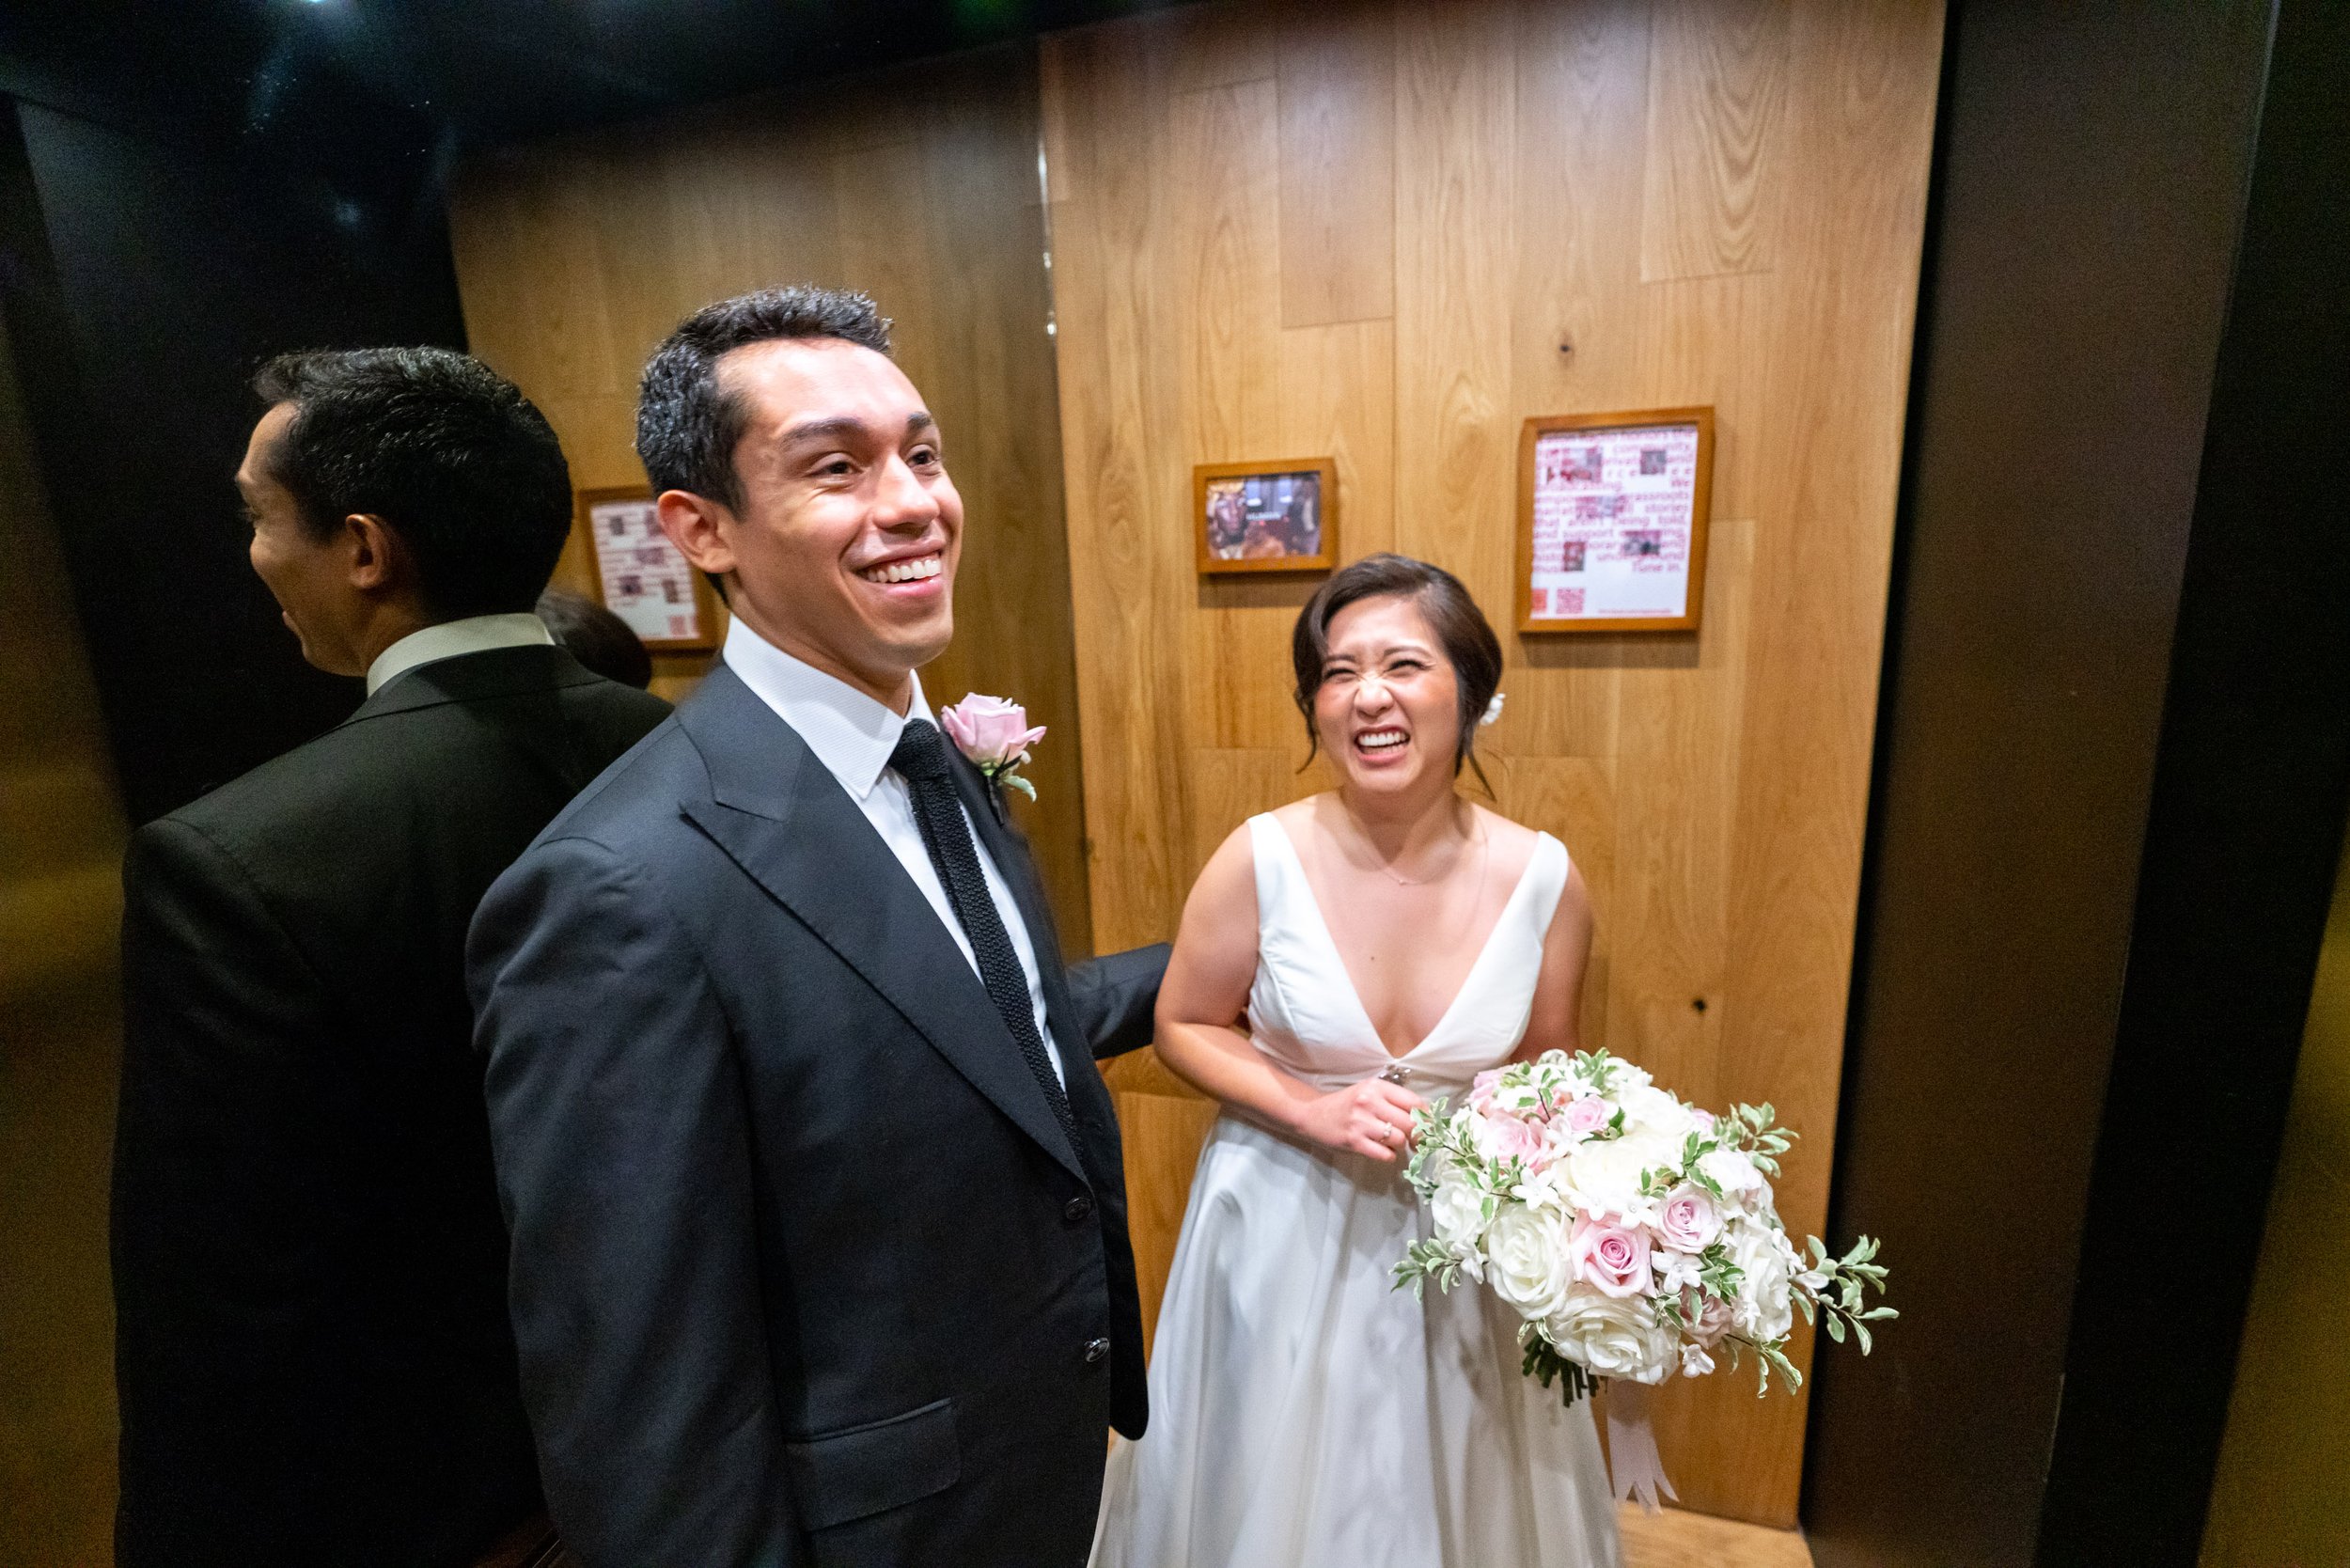 Bride and groom laughing in an elevator after the wedding ceremony